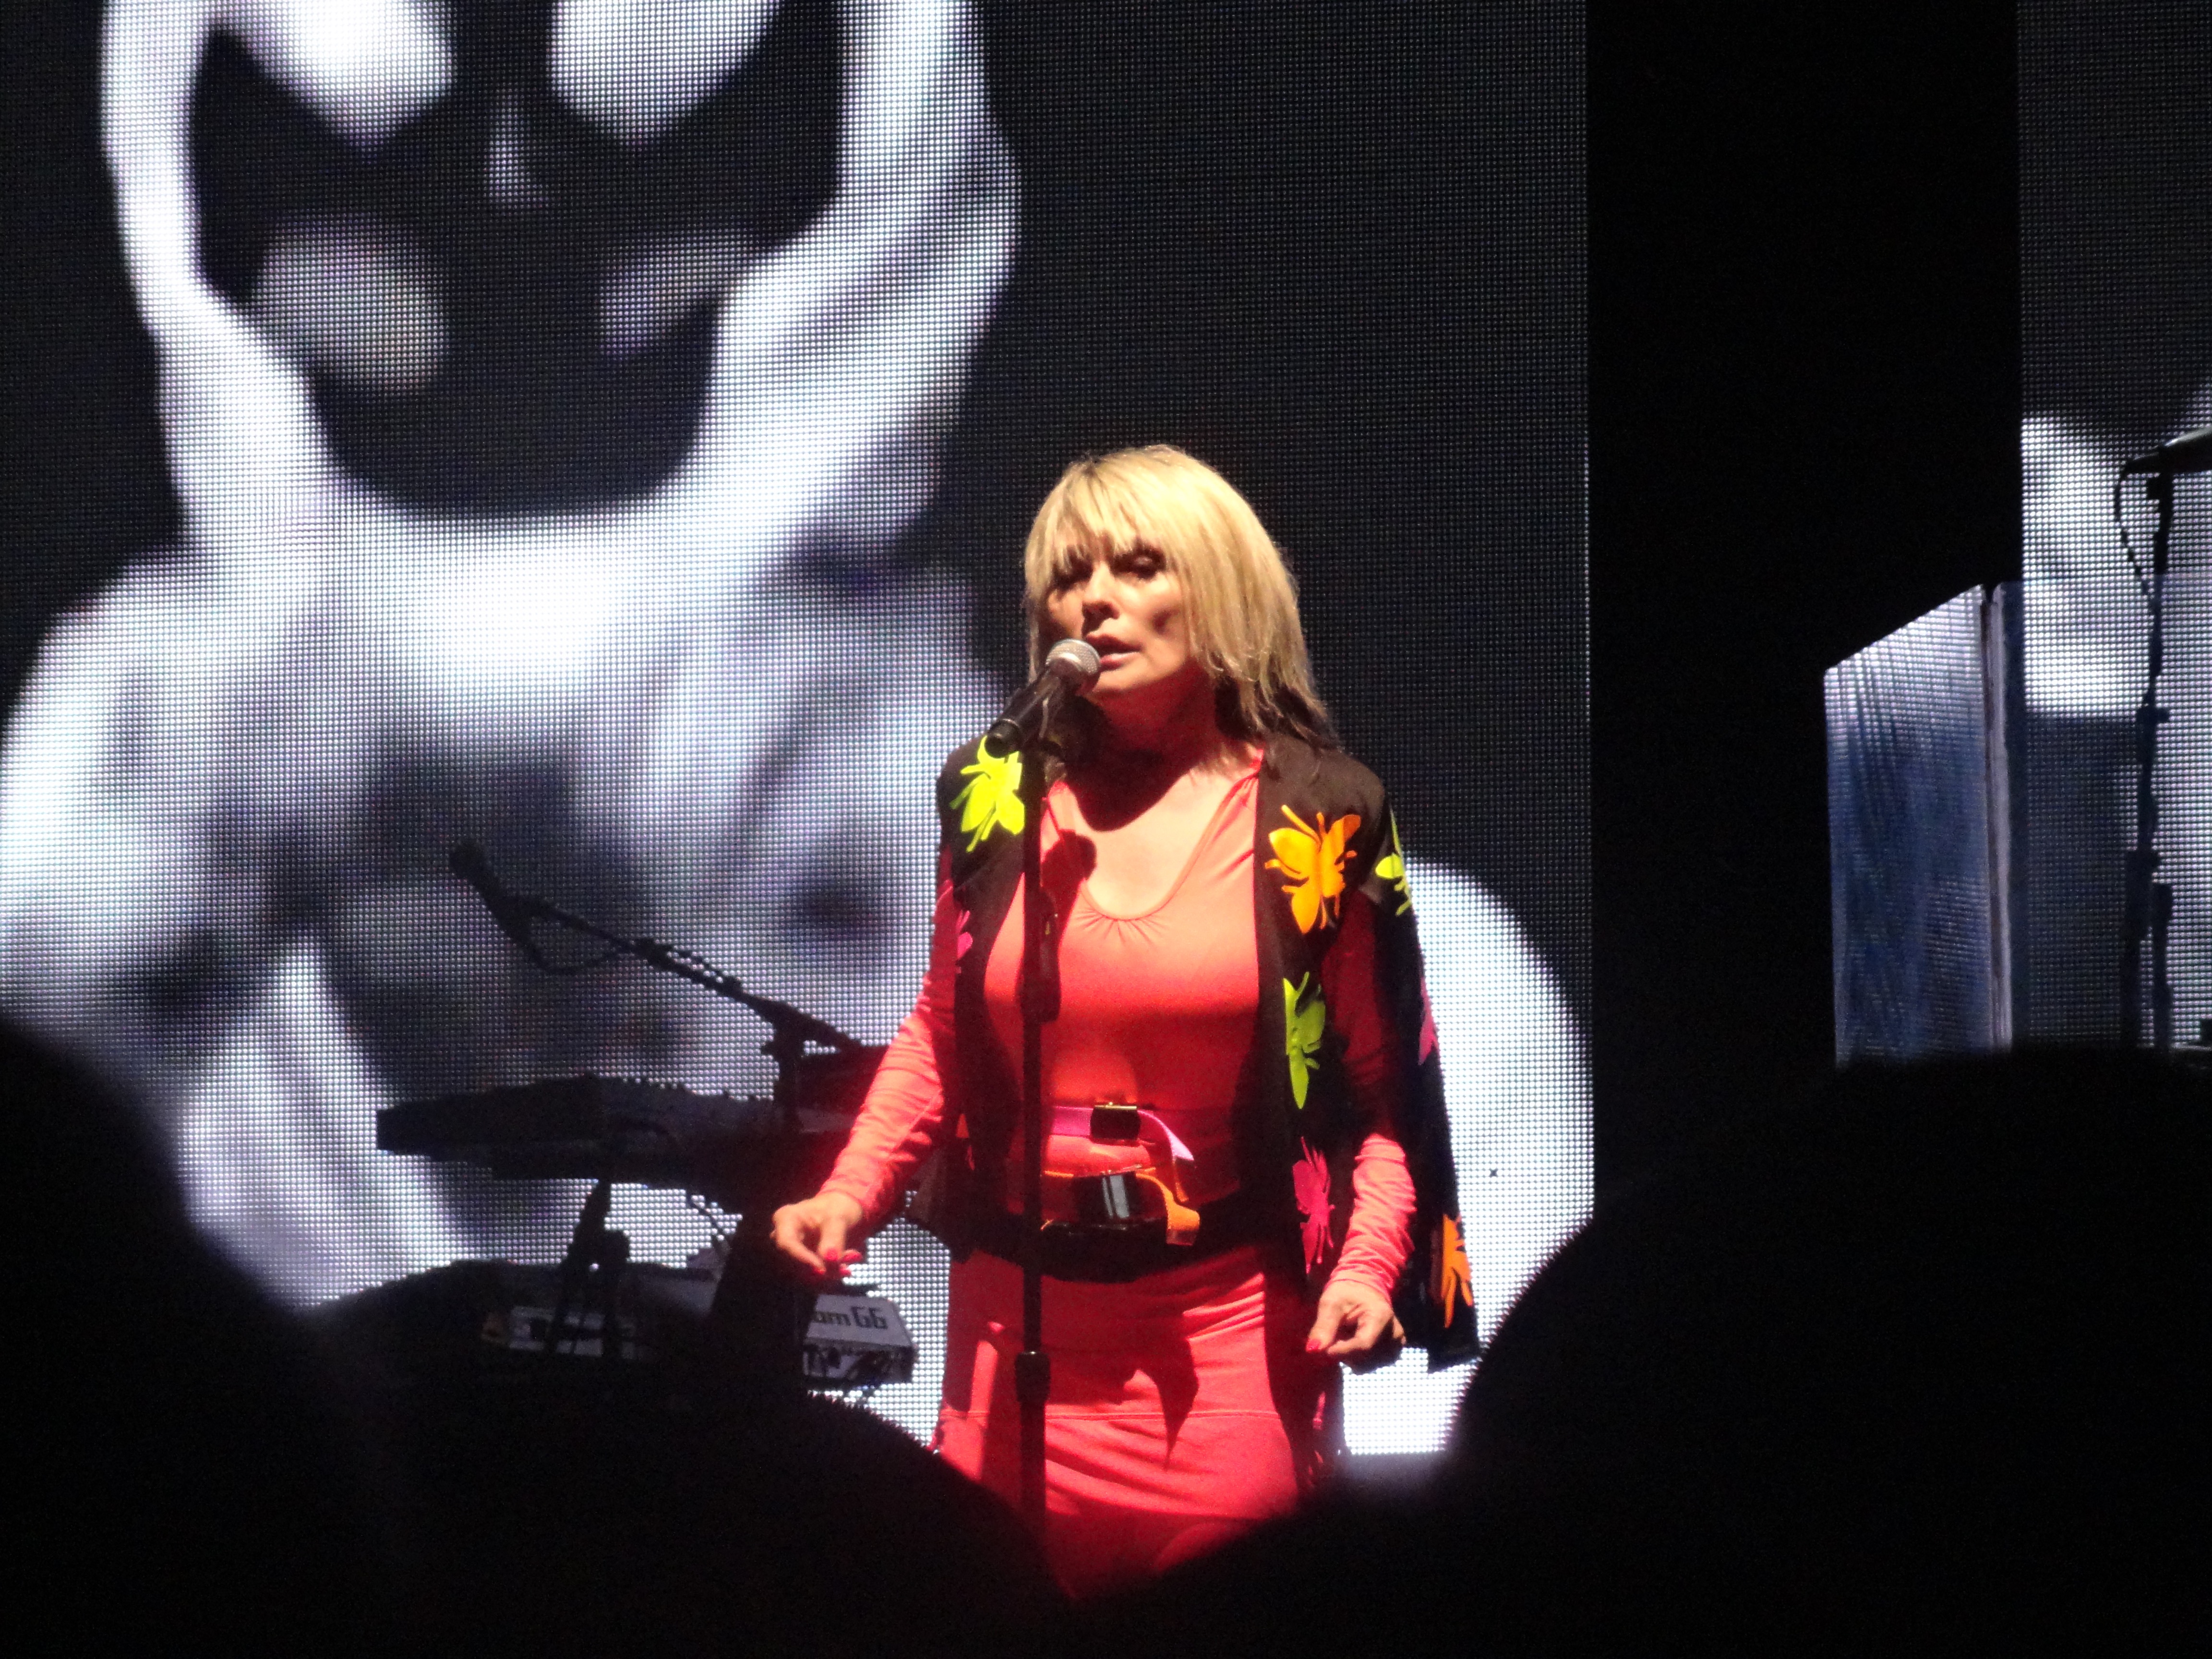 Valley Show Girl: Reliving childhood punk nostalgia with Blondie at MassMoCA